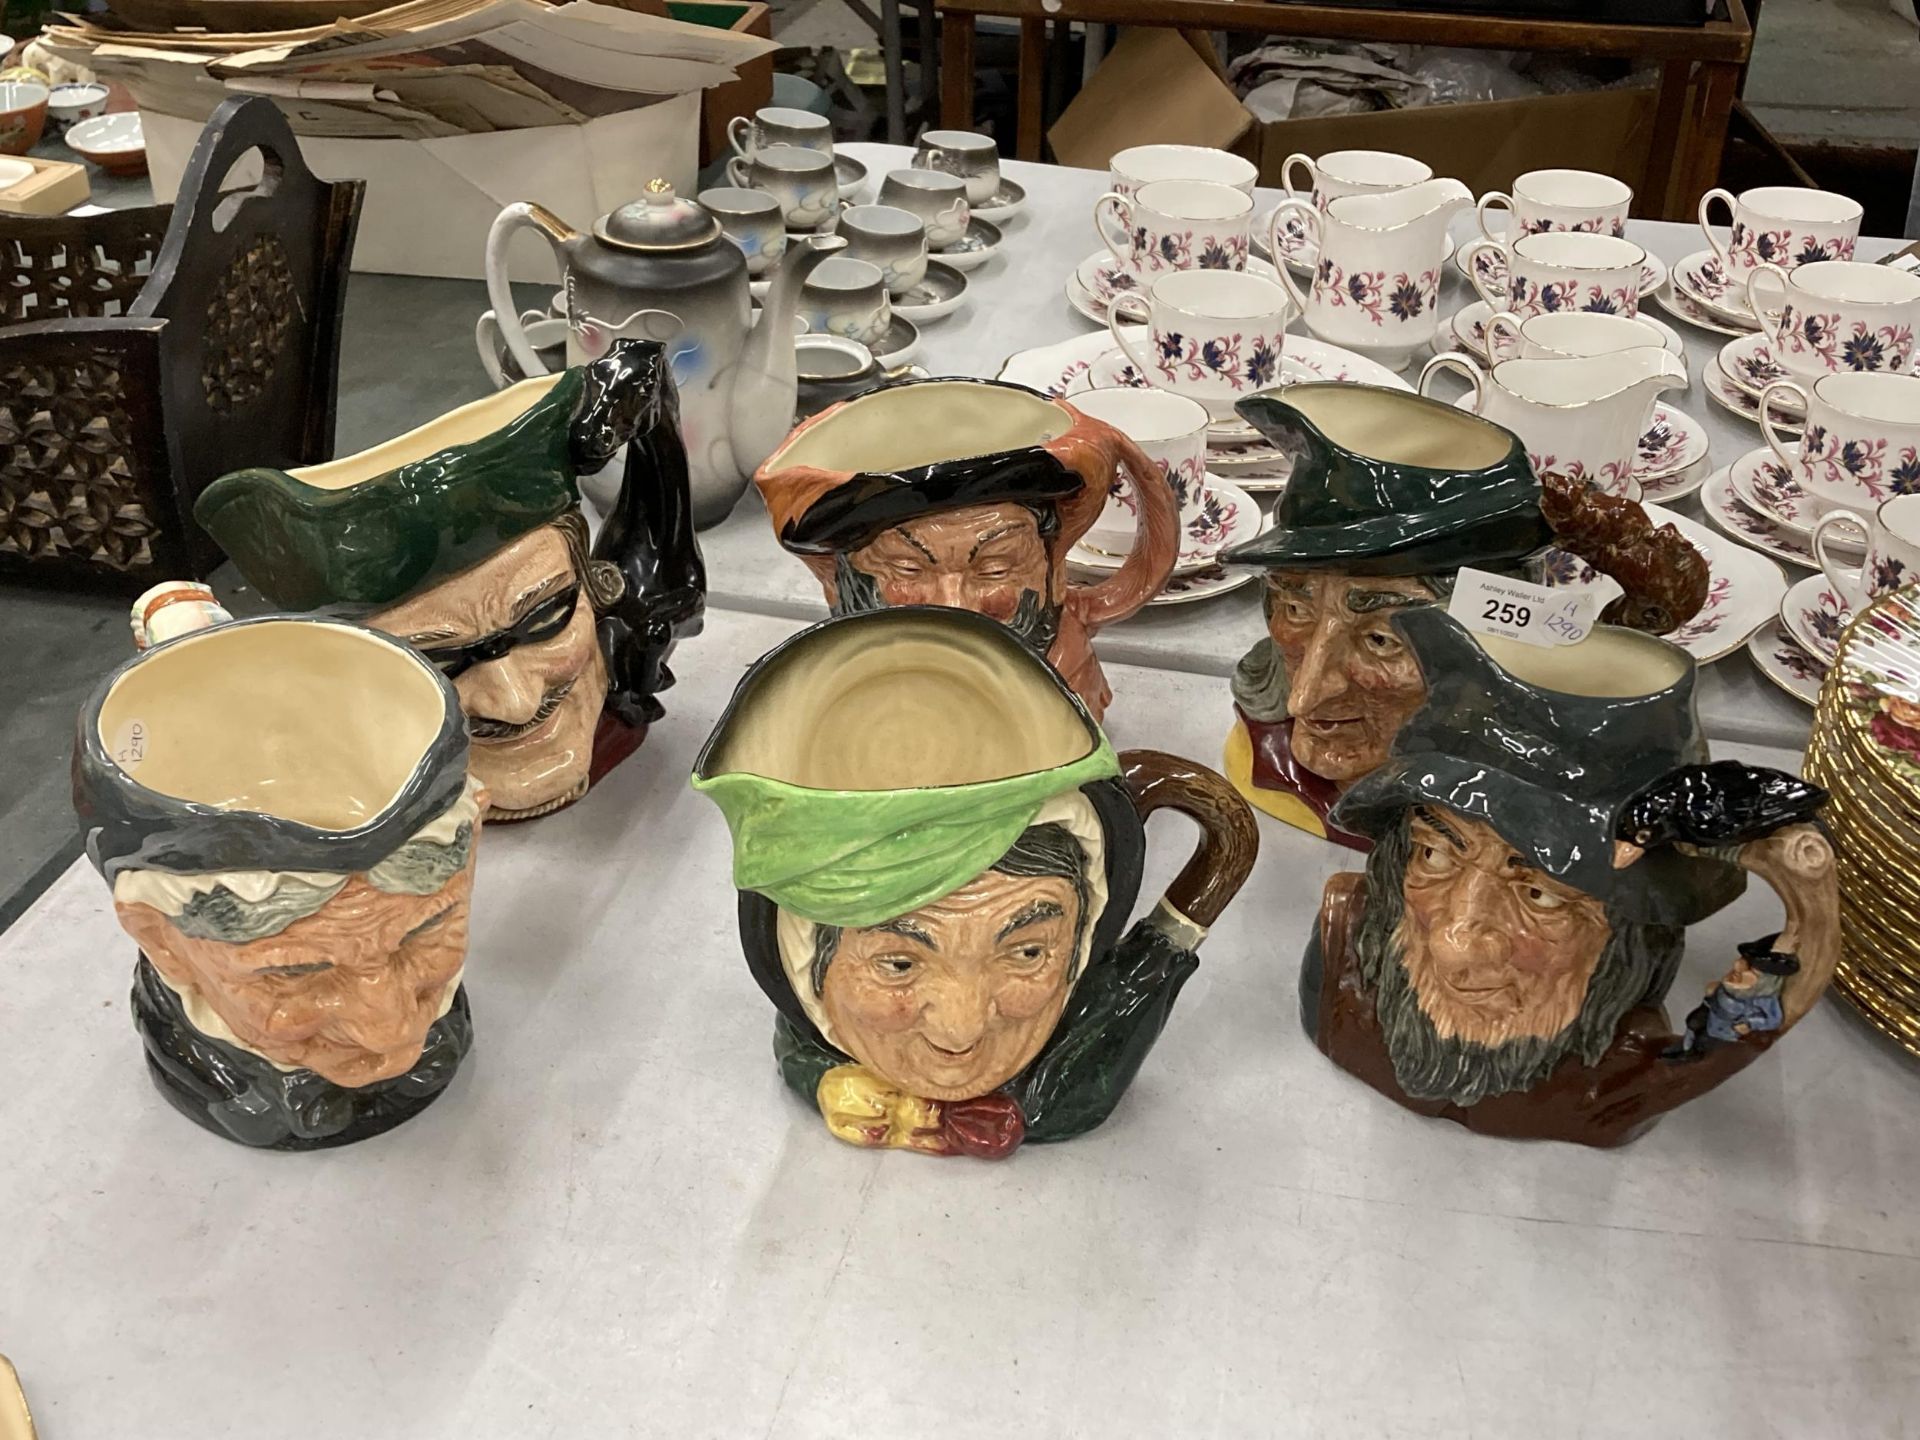 A GROUP OF SIX ROYAL DOULTON CHARACTER JUGS , RIP VAN WINKLE, PIED PIPER ETC